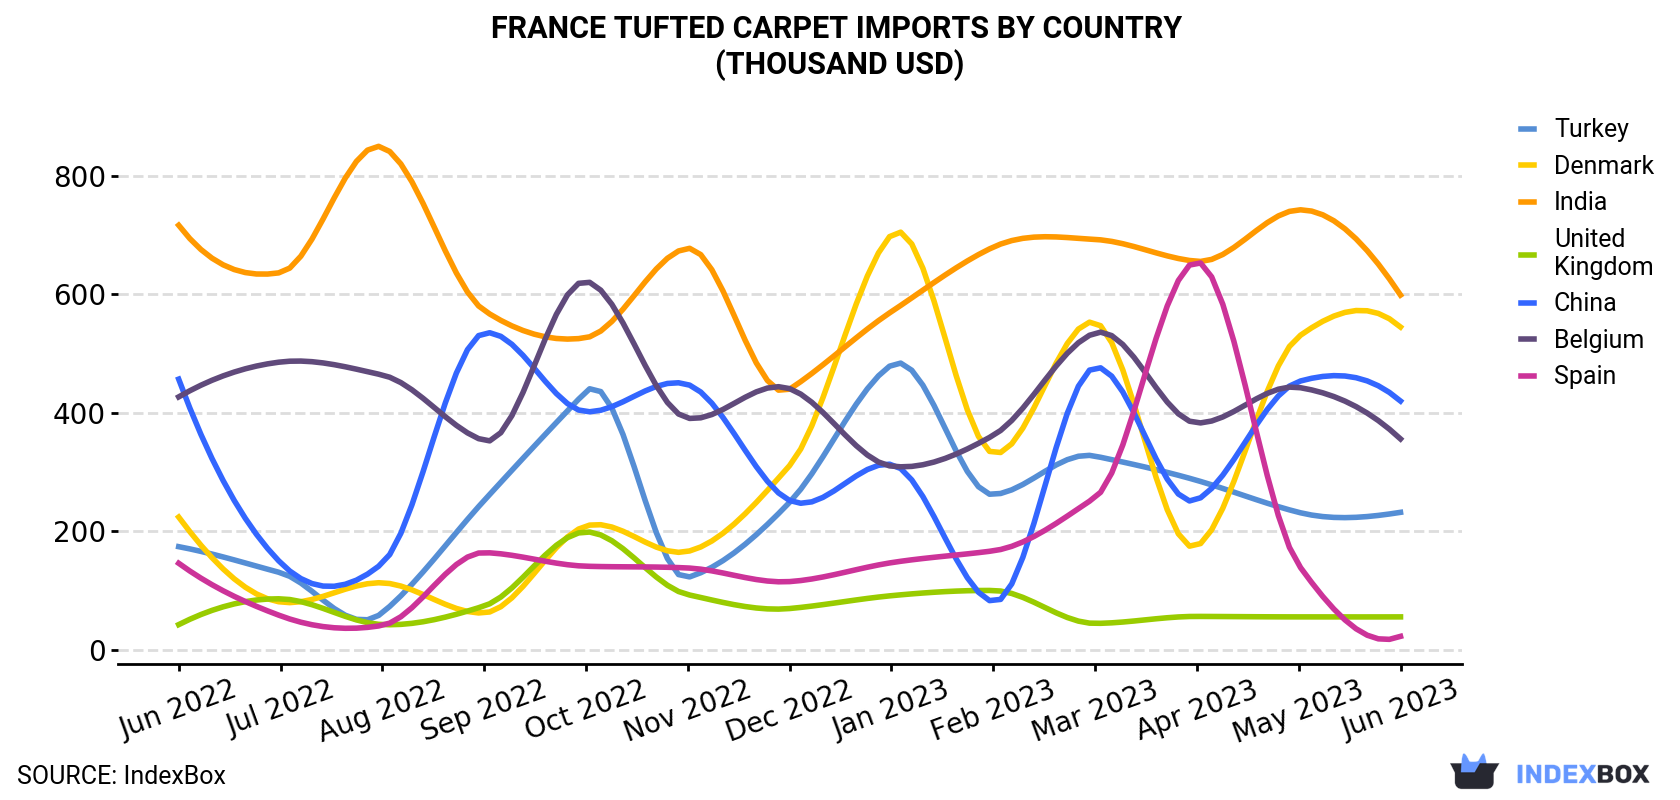 France Tufted Carpet Imports By Country (Thousand USD)